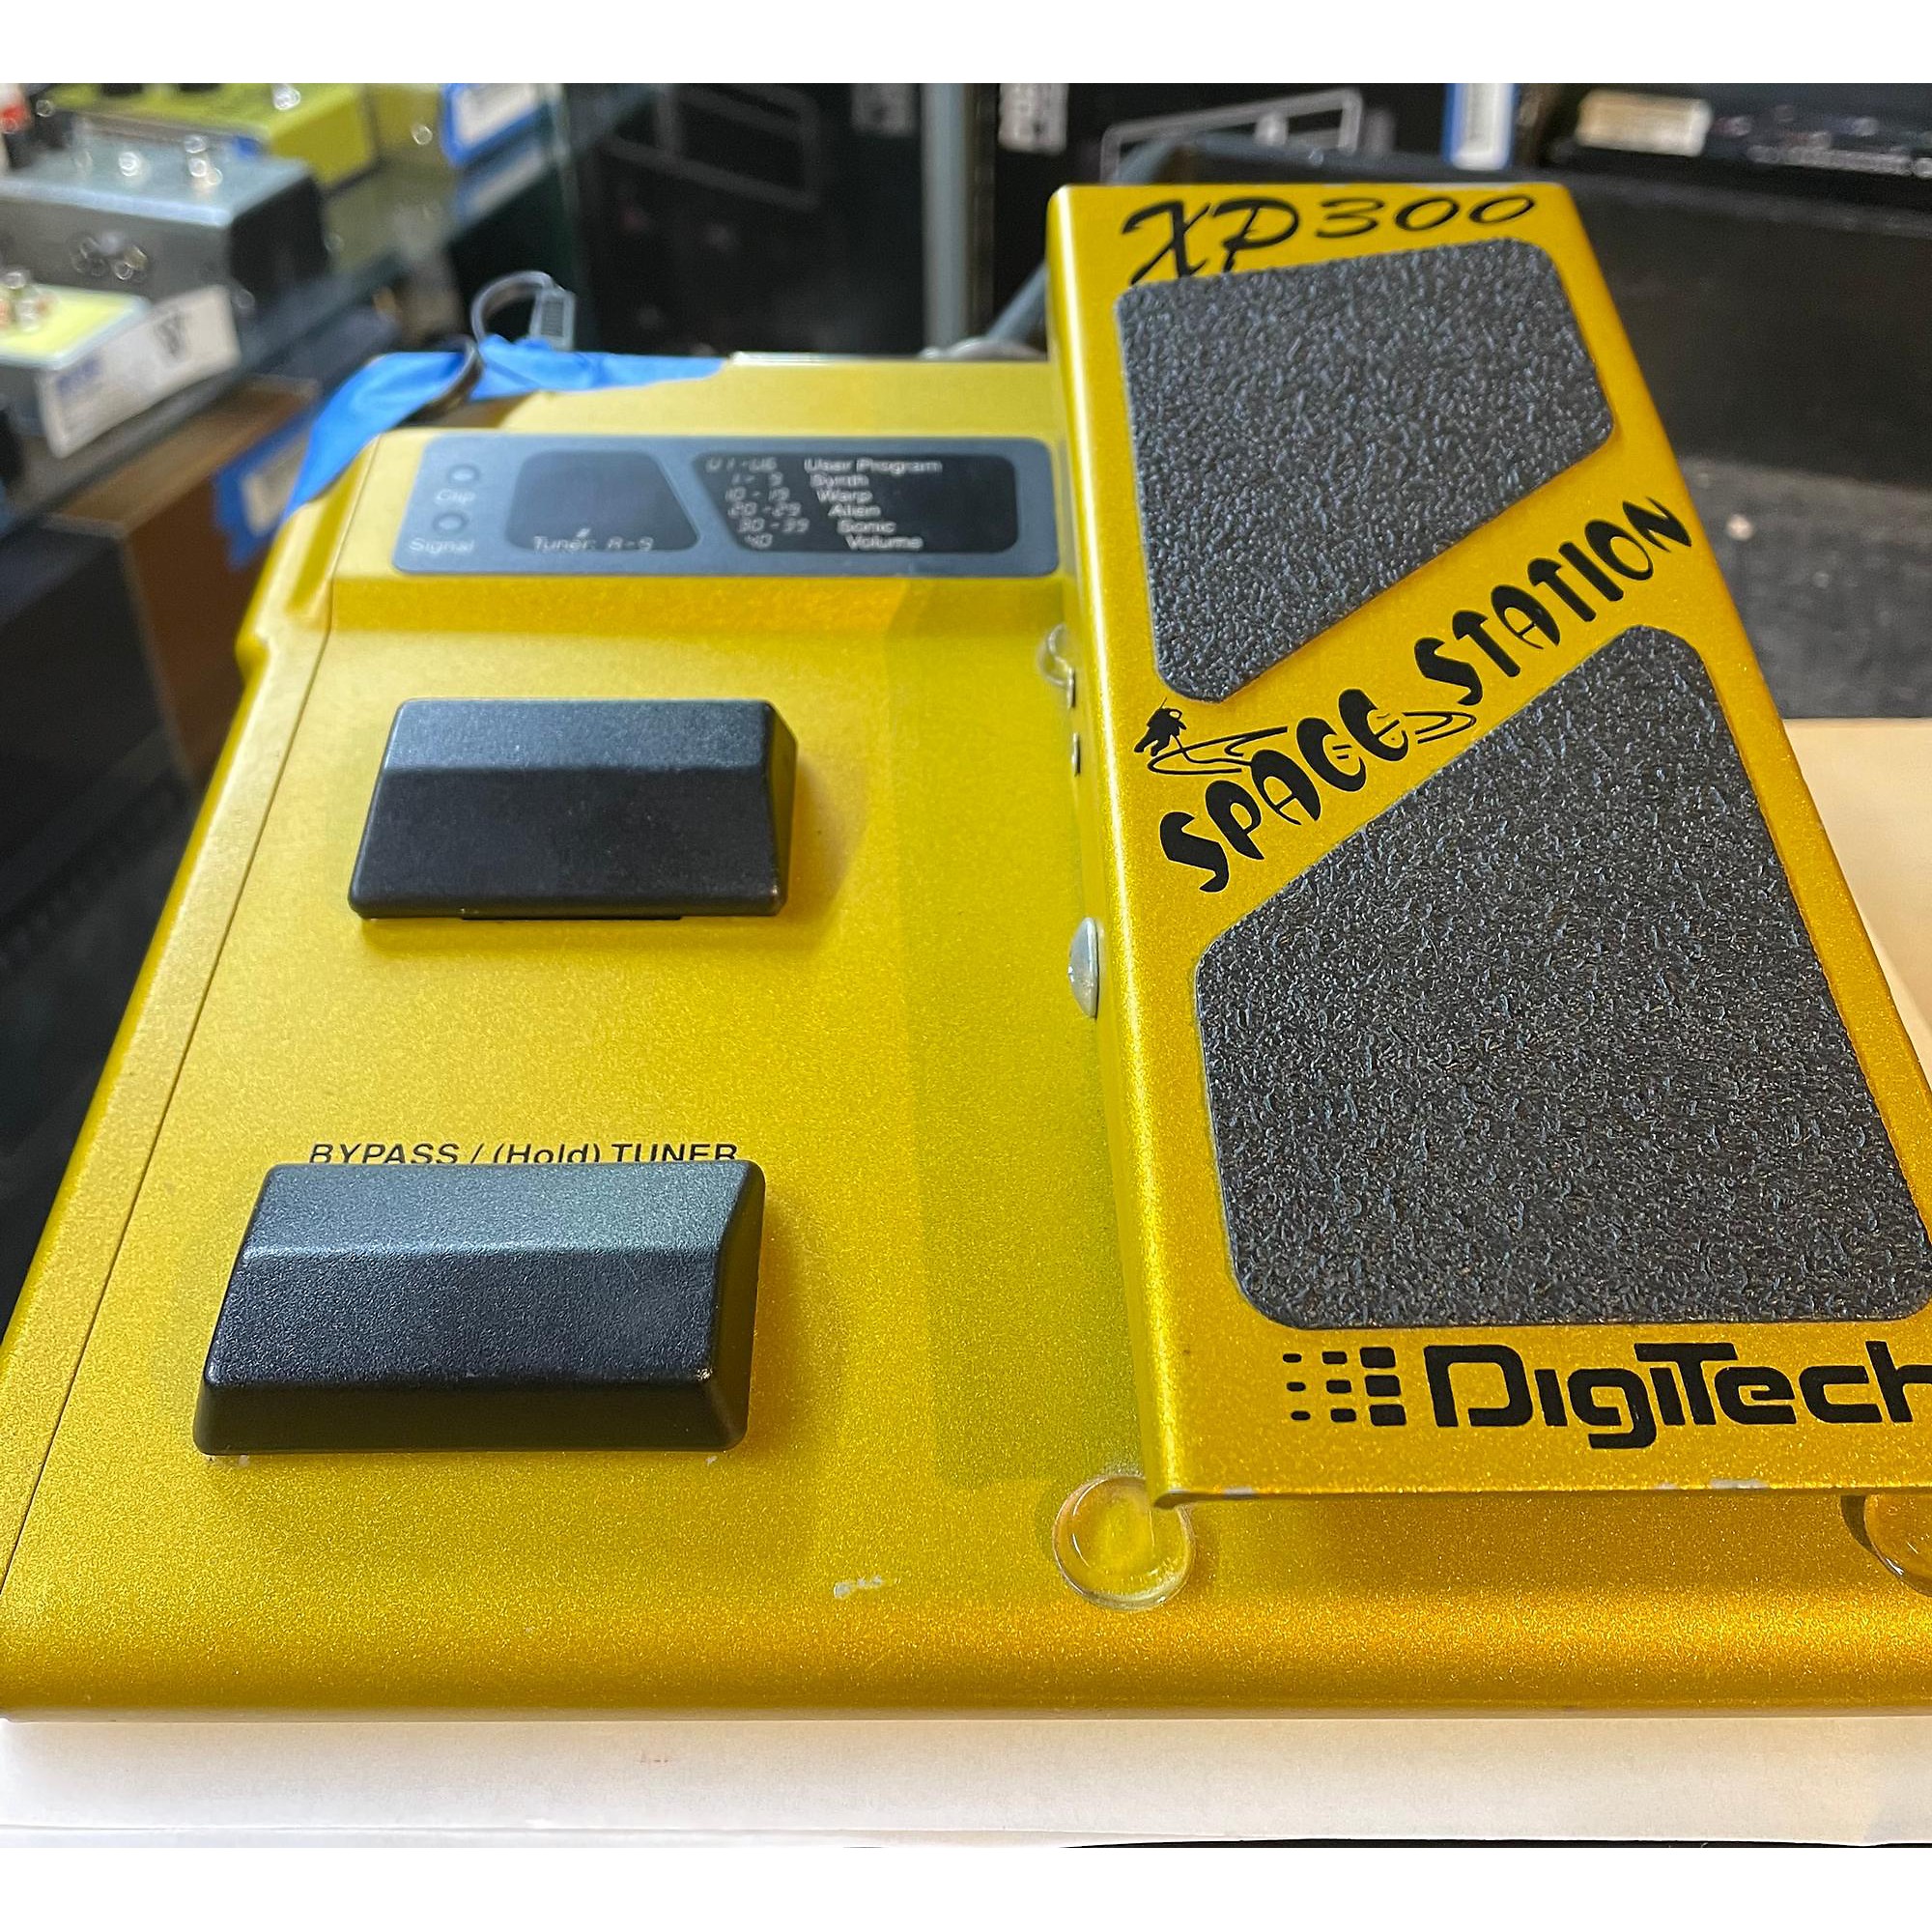 Used DigiTech XP300 Space Station Effect Pedal | Guitar Center